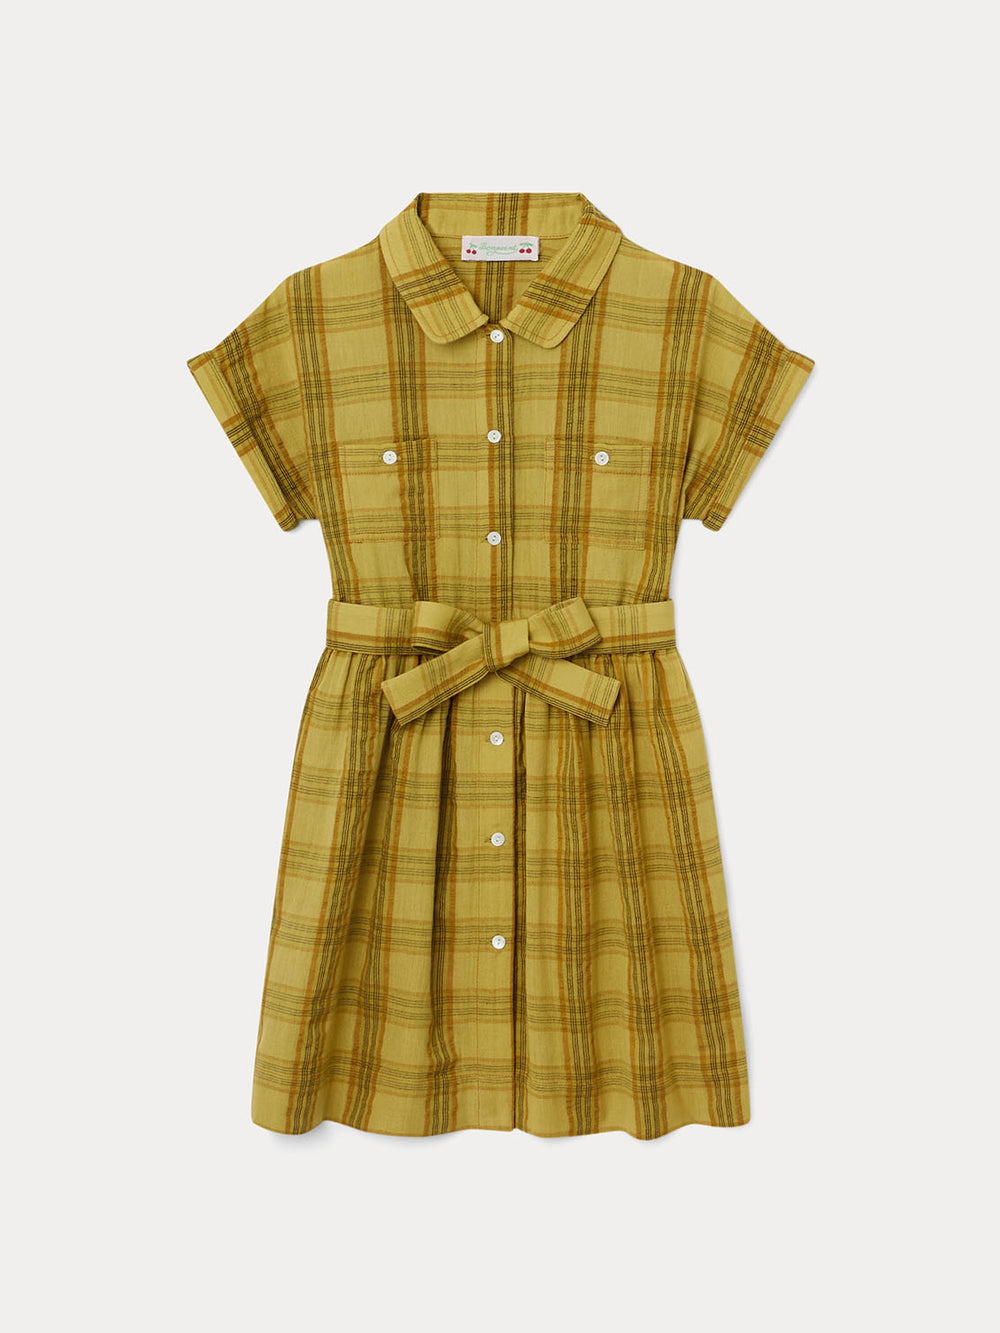 Dyed Woven Cotton Voile Dress for Girls acid yellow